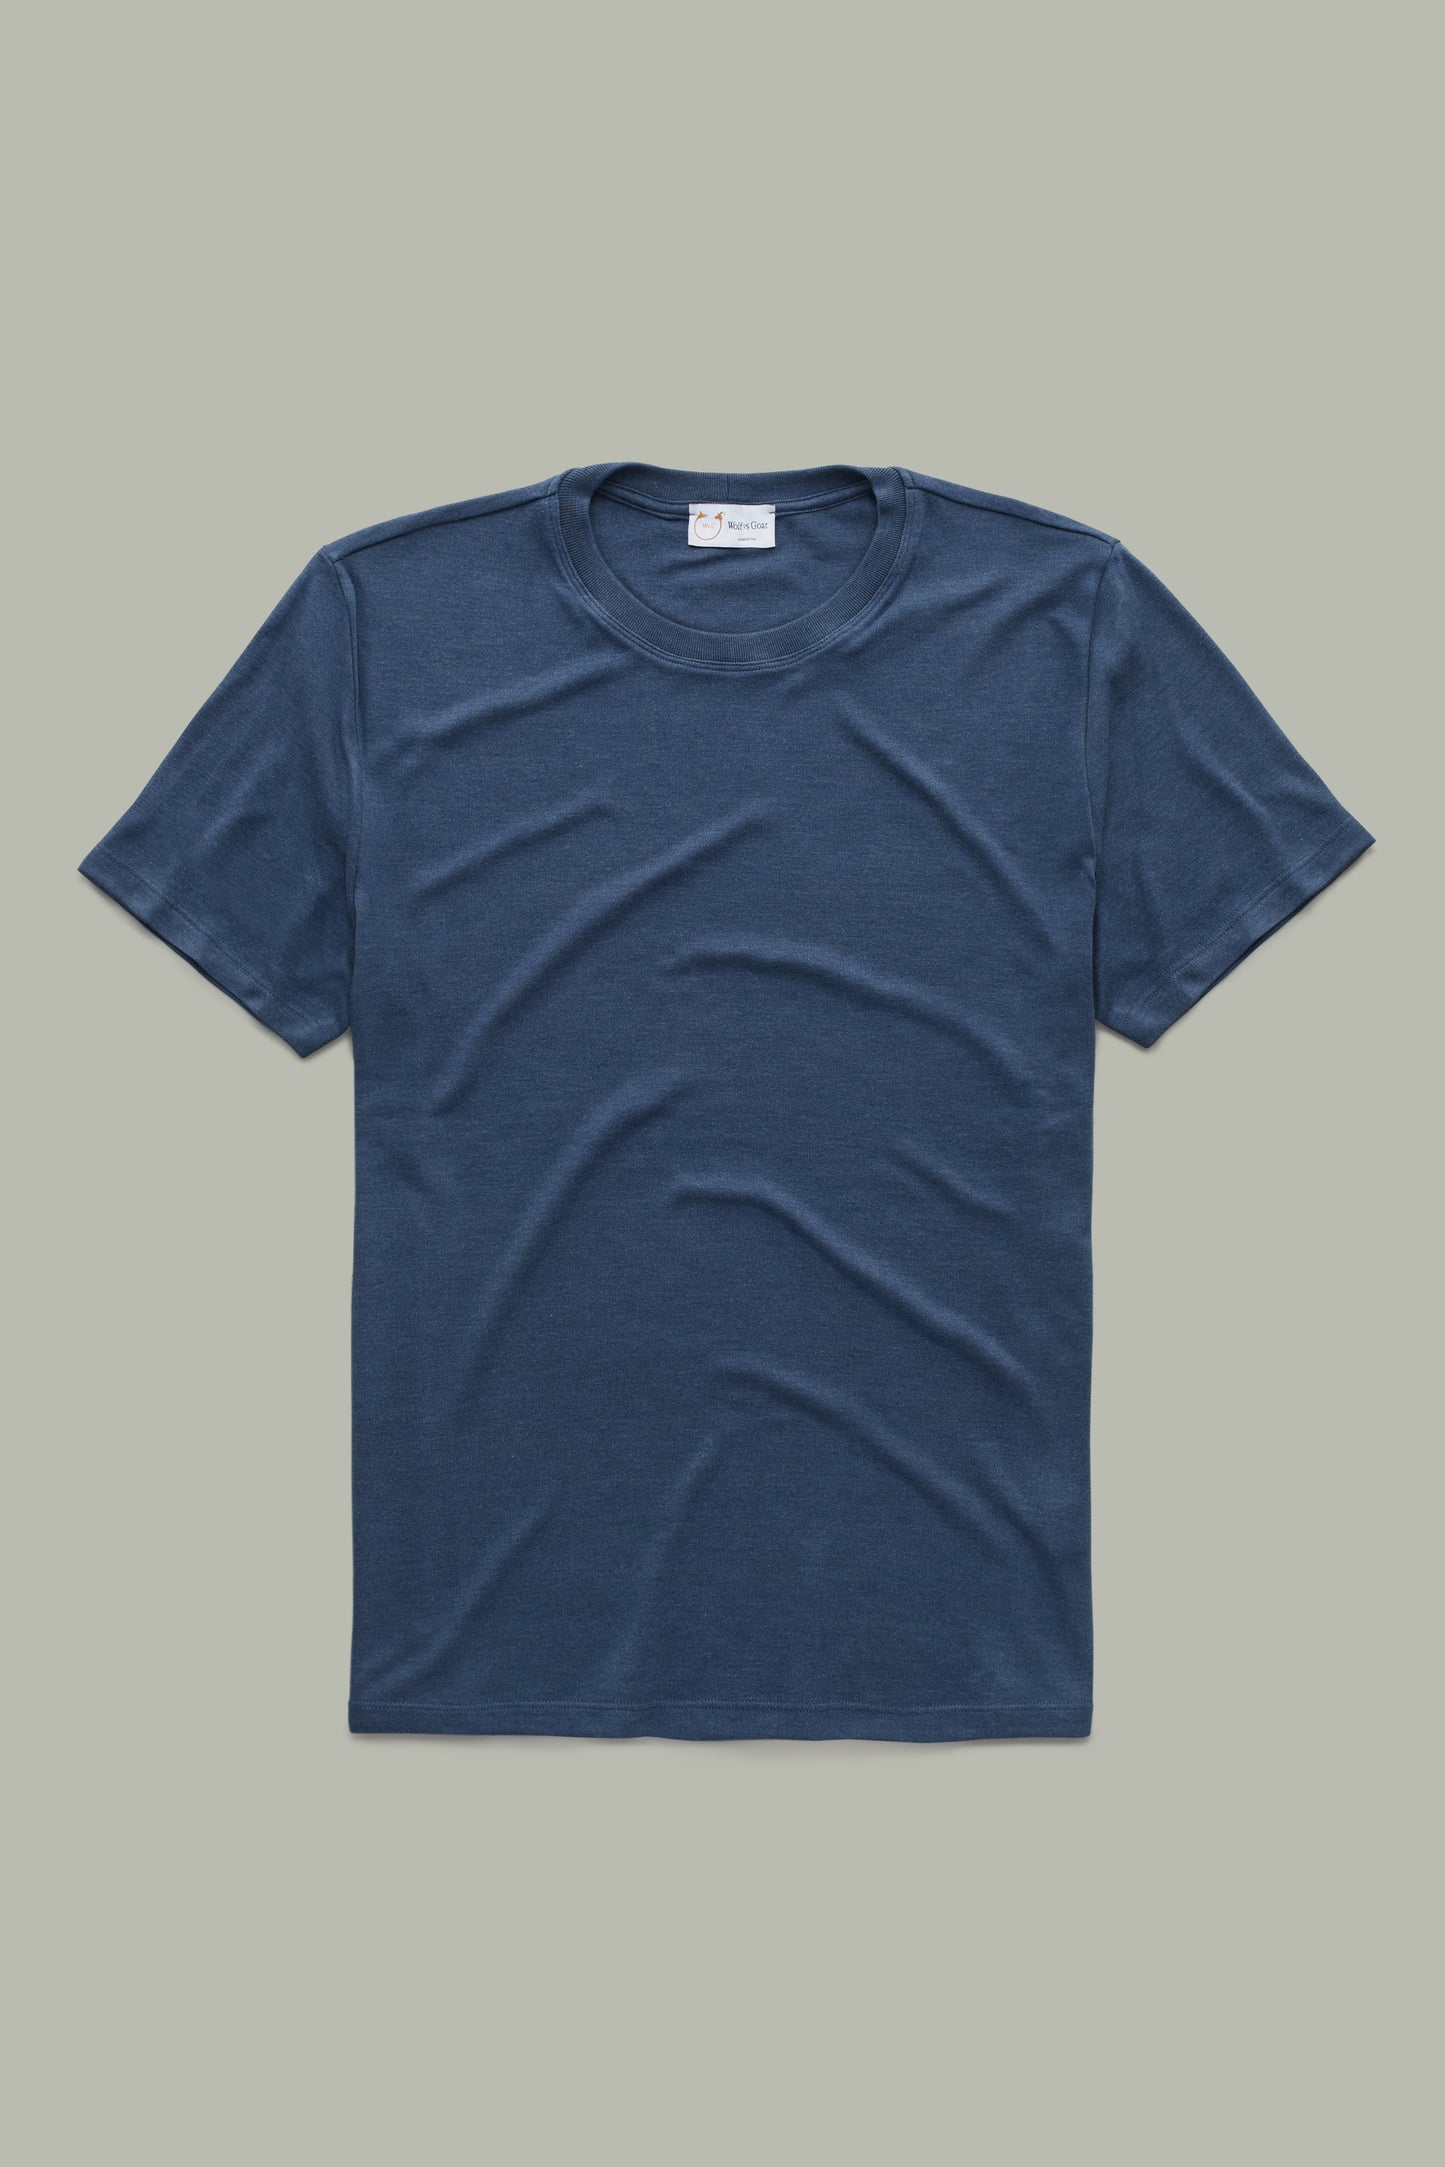 Domitian Piccolo Short Sleeve Crew Navy Piece Dyed